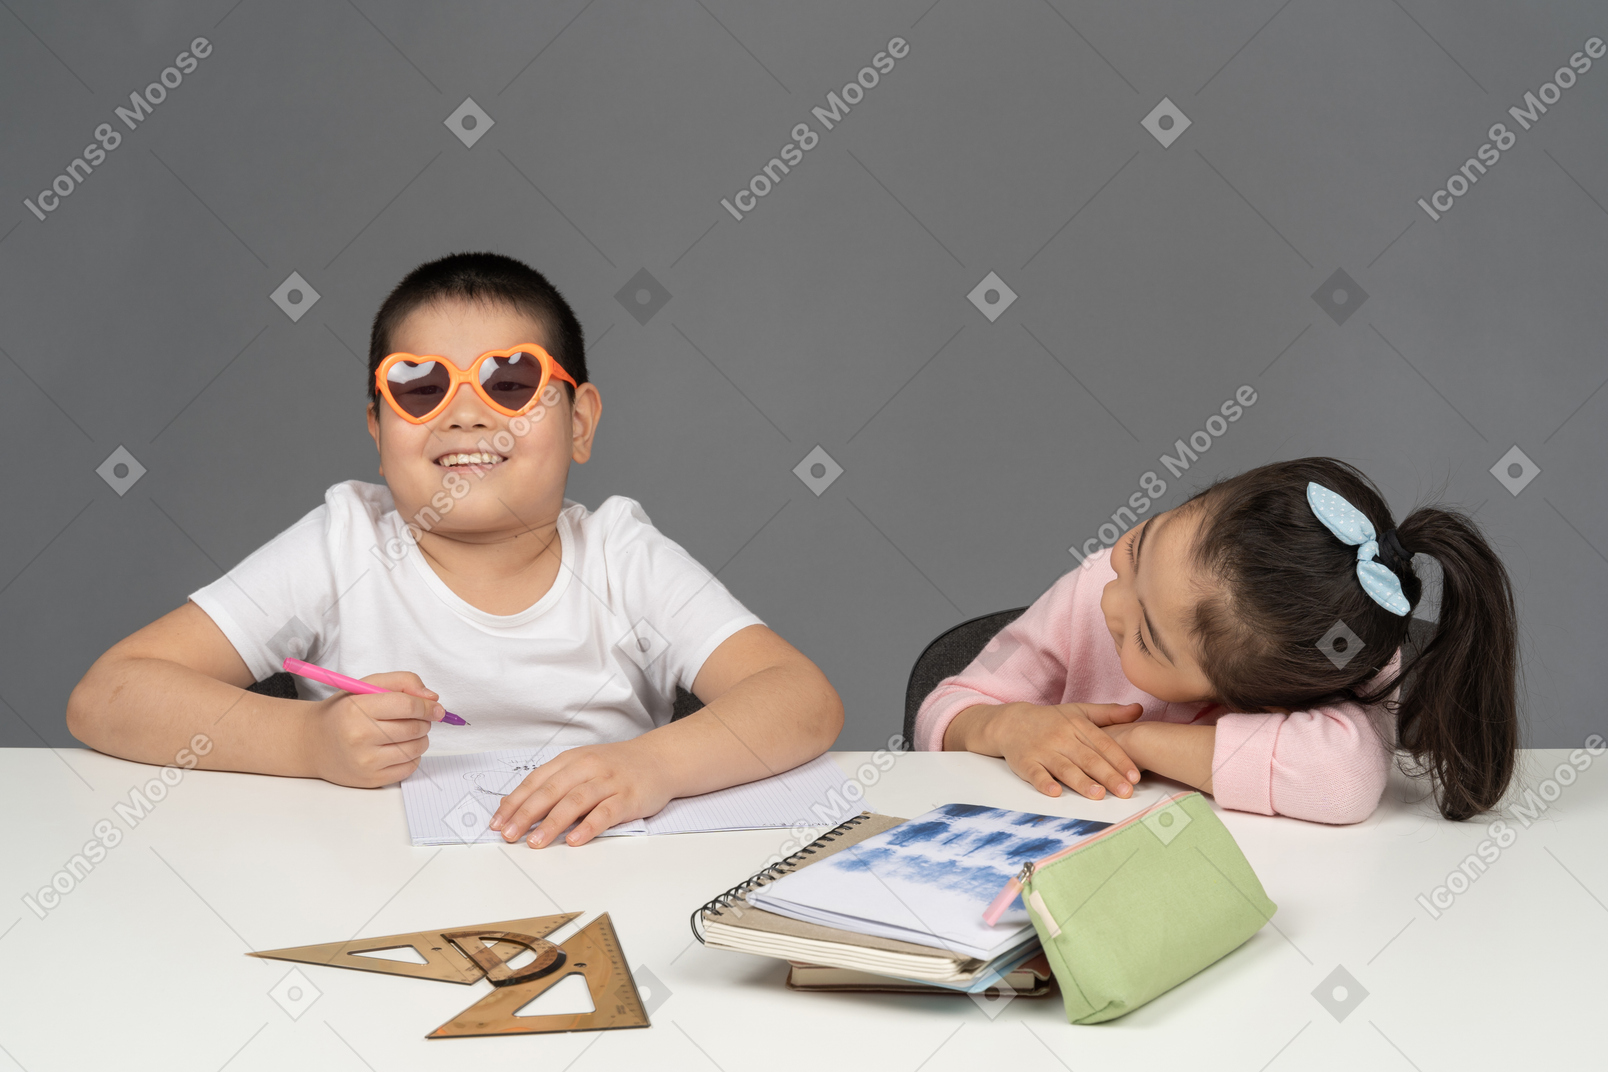 Girl laughing at her brother wearing sunglasses